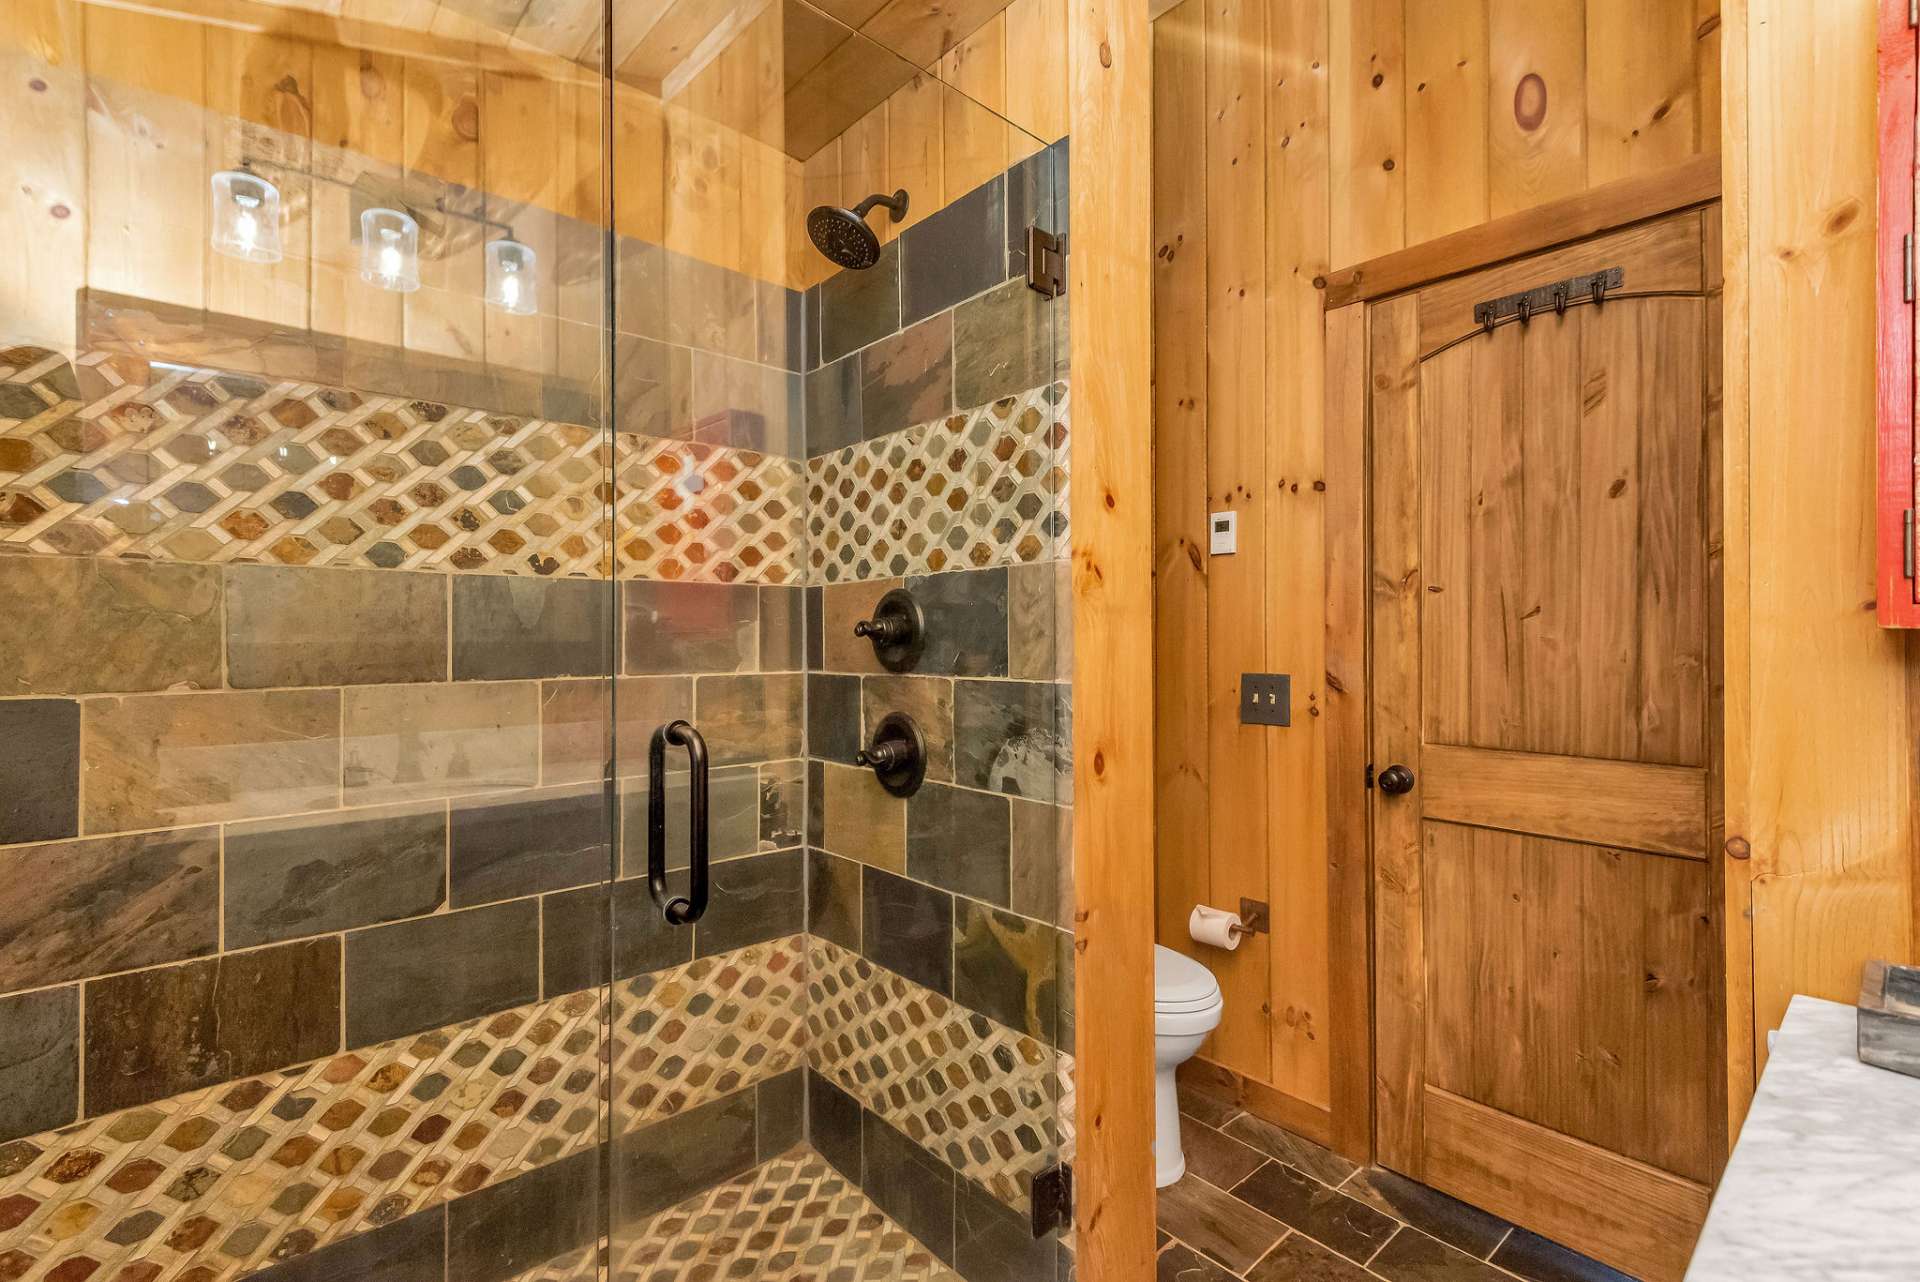 Pamper yourself in the primary bath's uniquely designed walk-in slate tile shower with glass doors.